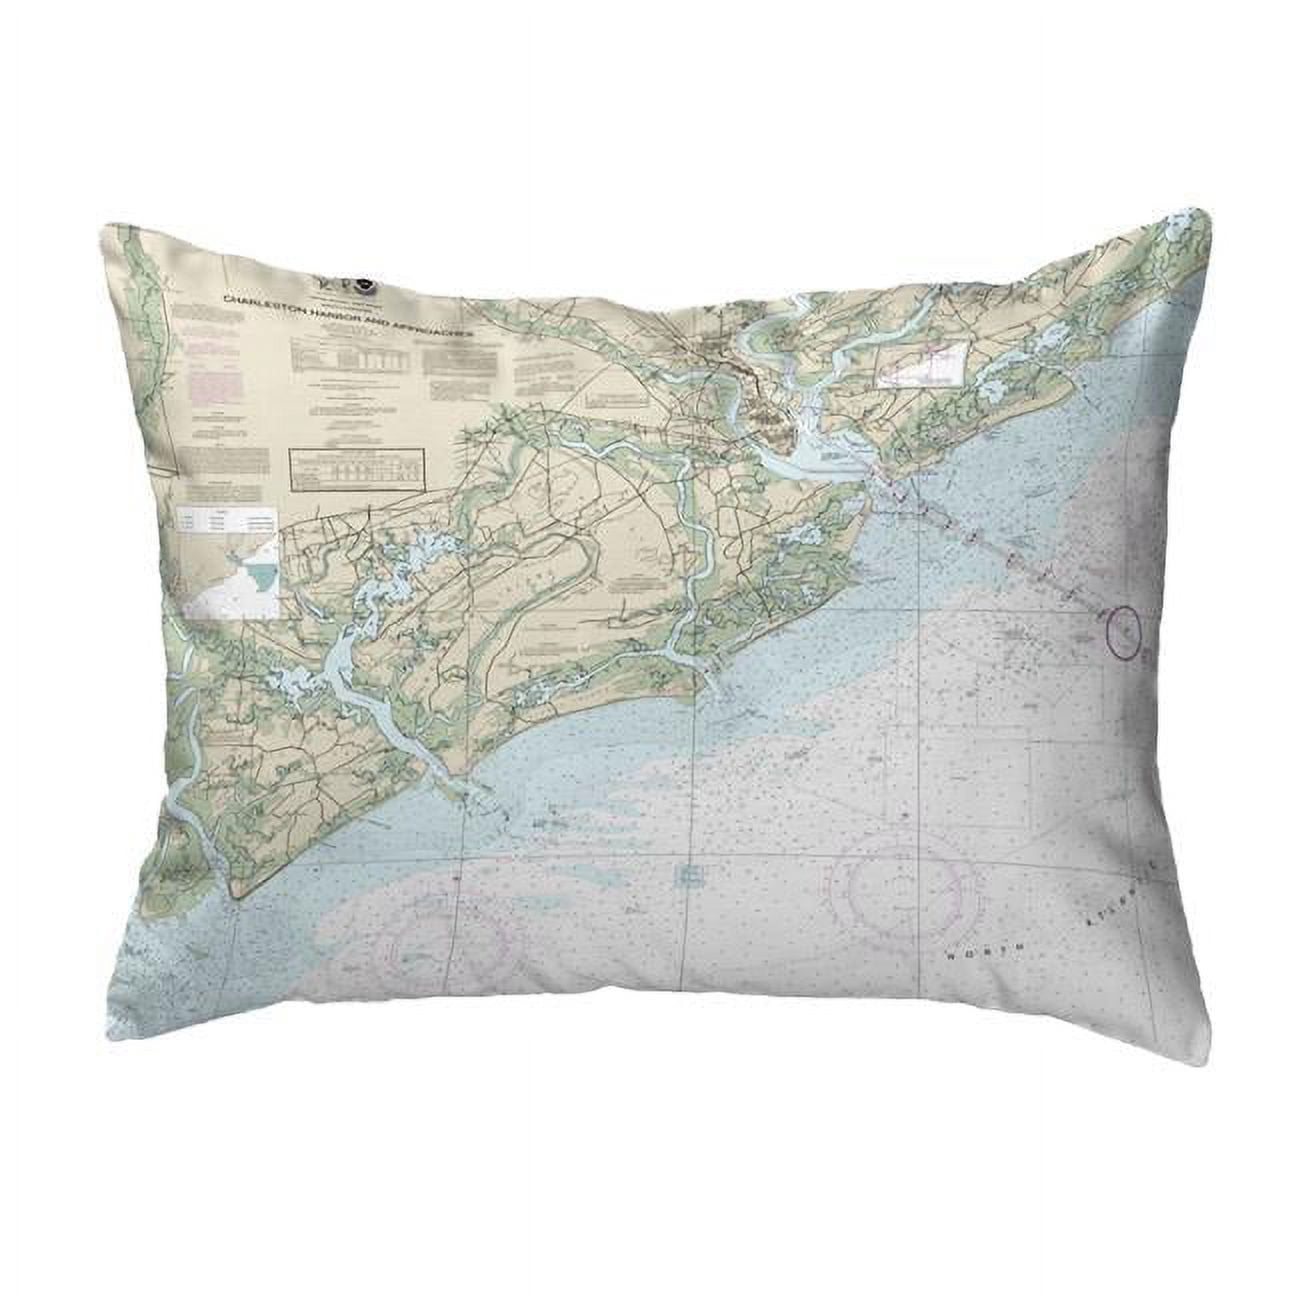 11 x 14 in. Charleston Harbor & Approaches, SC Nautical Map Non-Corded Indoor & Outdoor Pillow -  JensenDistributionServices, MI2816436